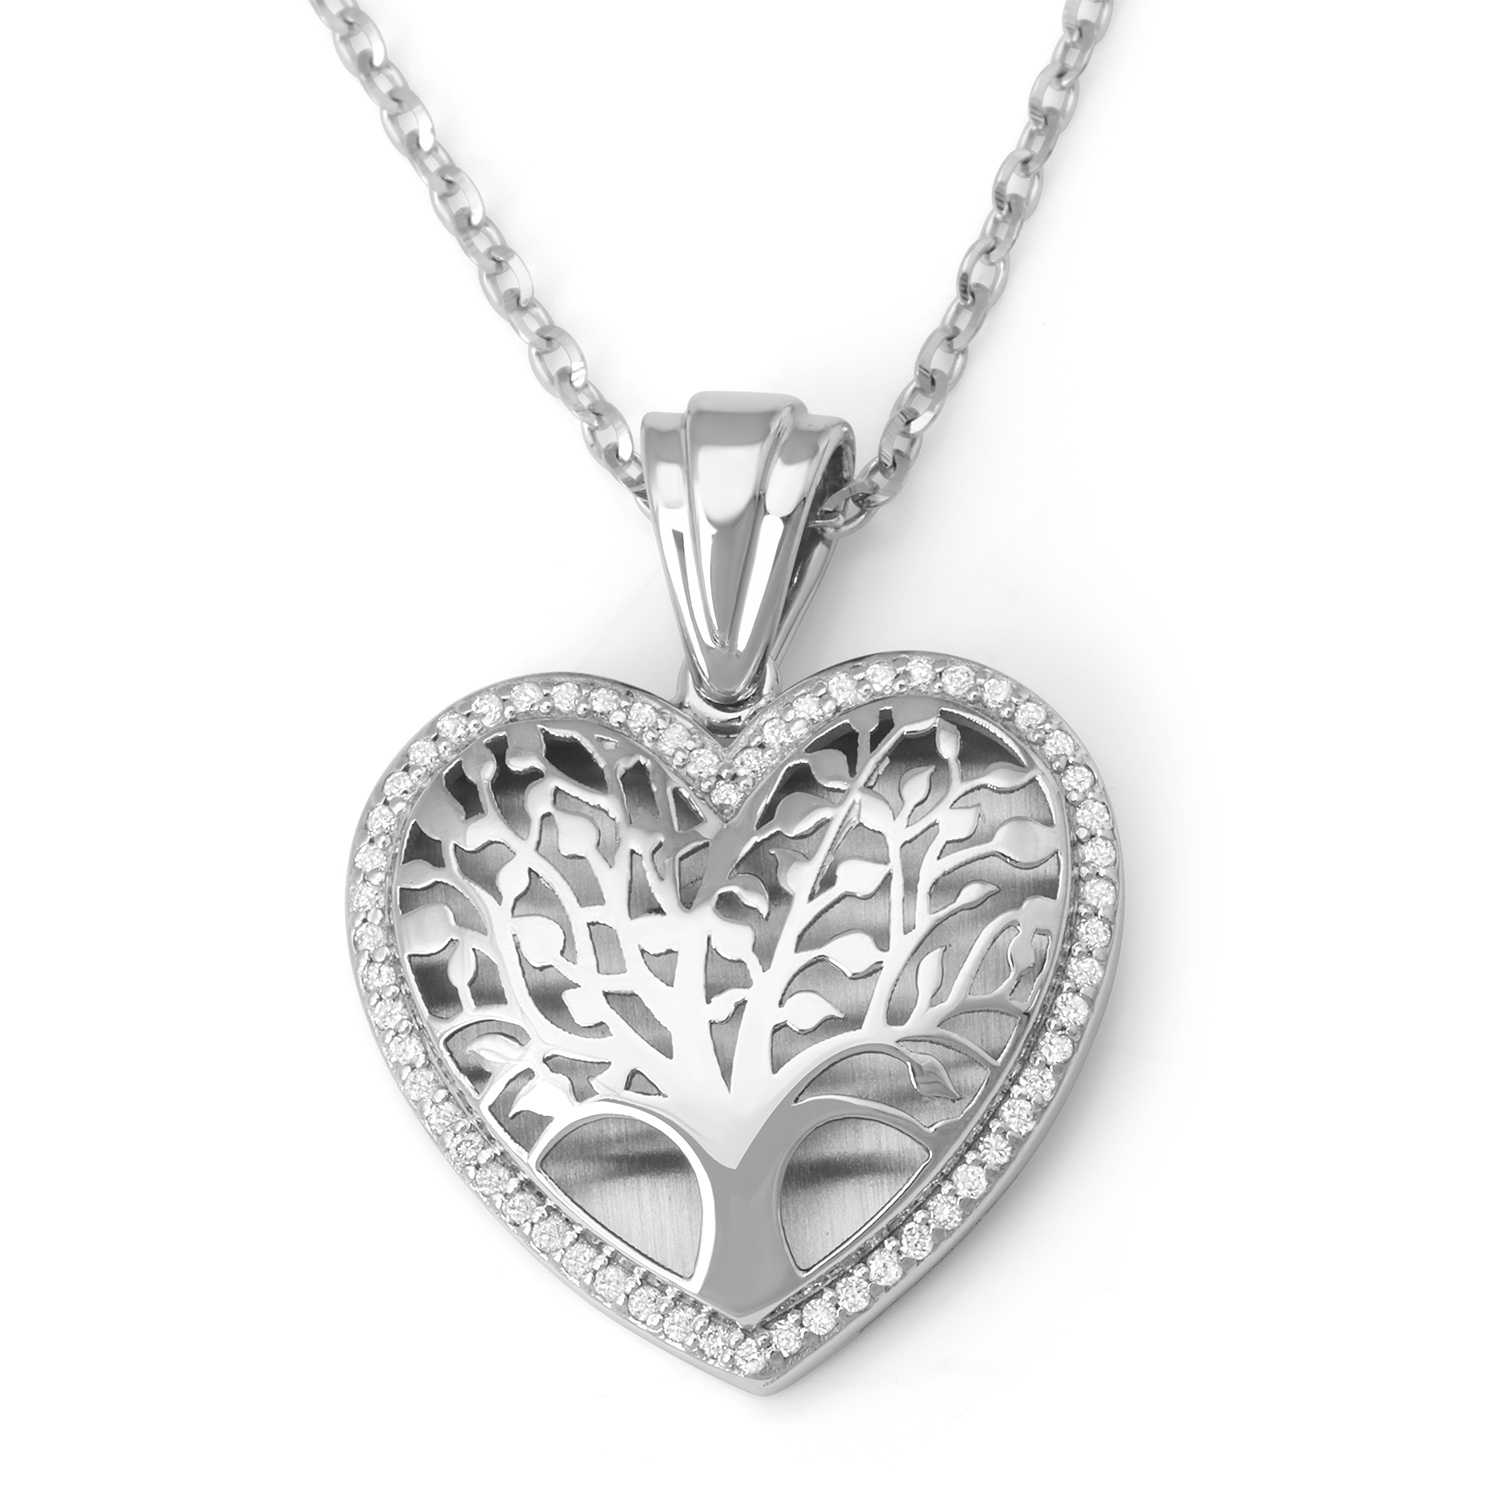 Anbinder Jewelry 14K White Gold Heart Shaped Tree of Life Pendant with Diamonds - 1